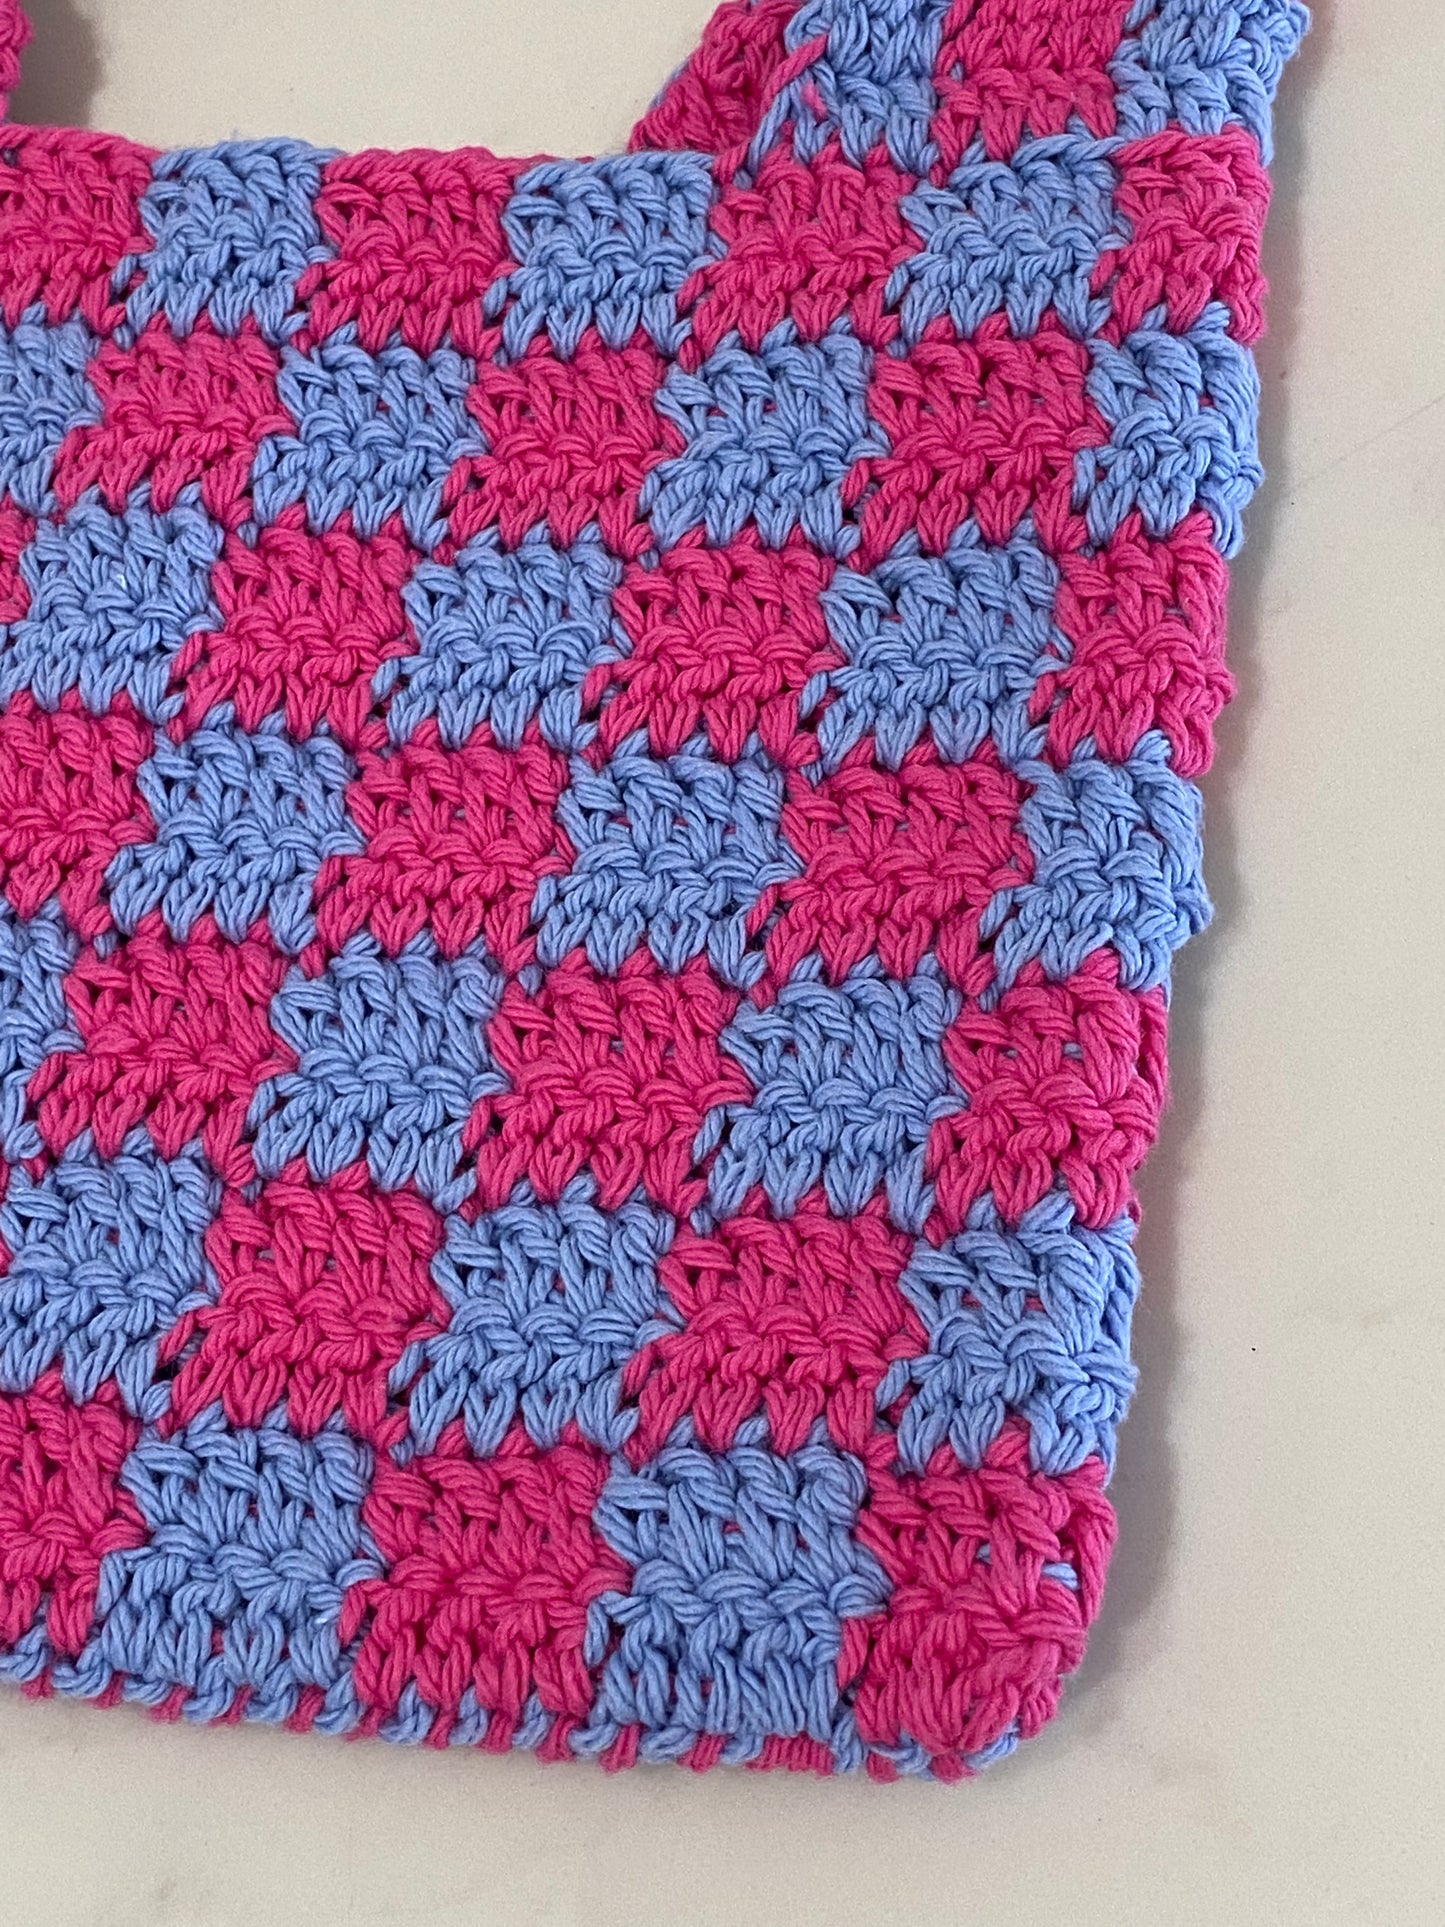 Crochet Shoulder Bag by Clever Stitches - Blue Raspberry